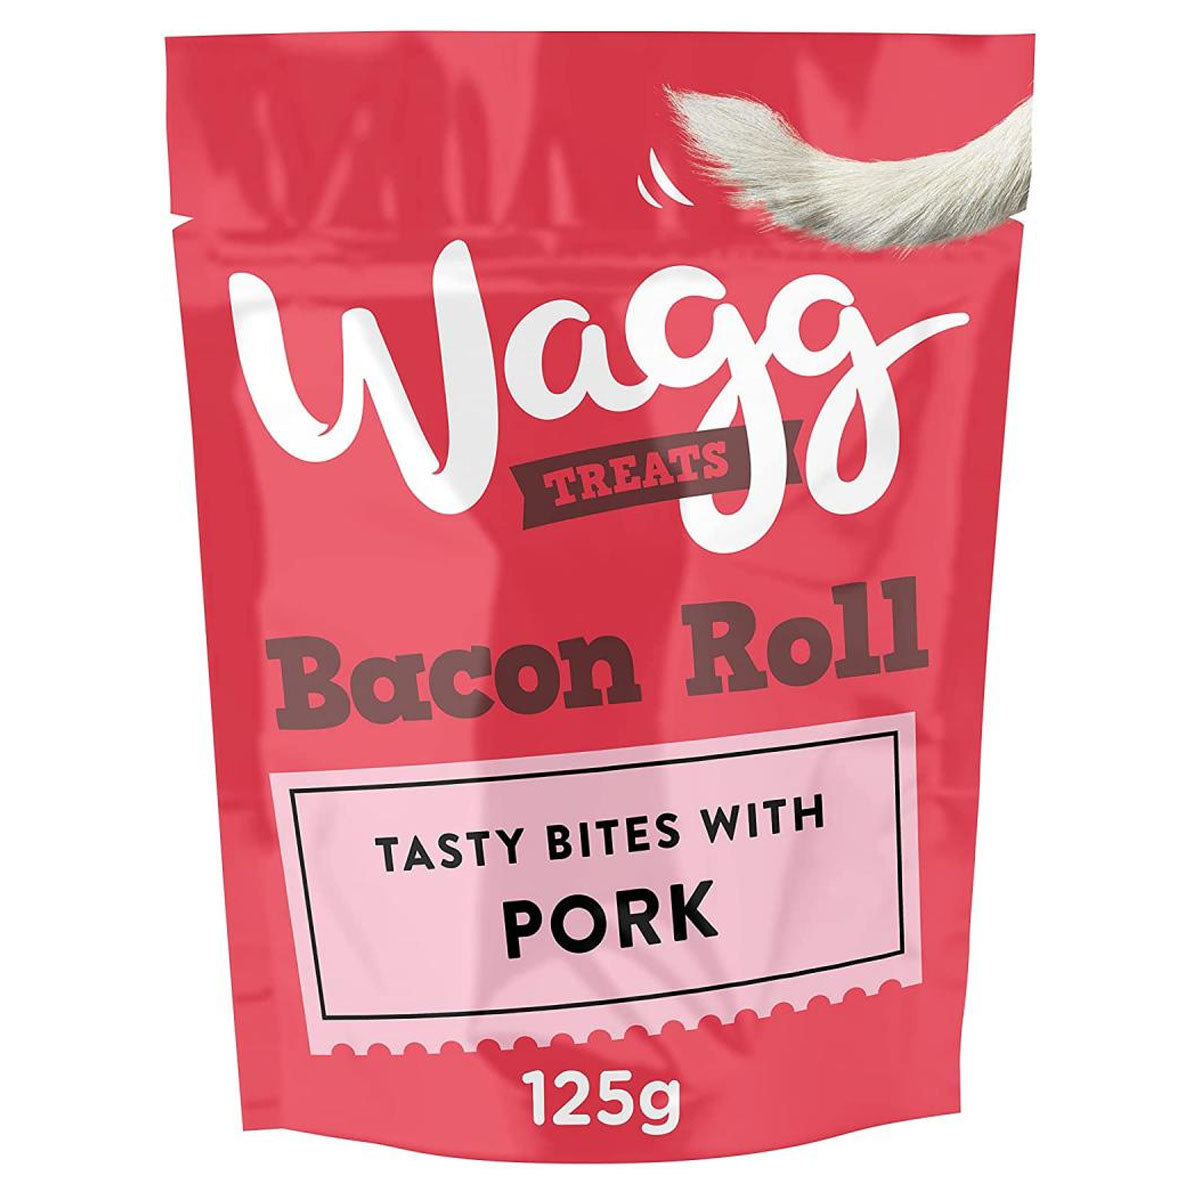 Wagg - Dog Treats Bacon Roll with Pork - 125g - Continental Food Store